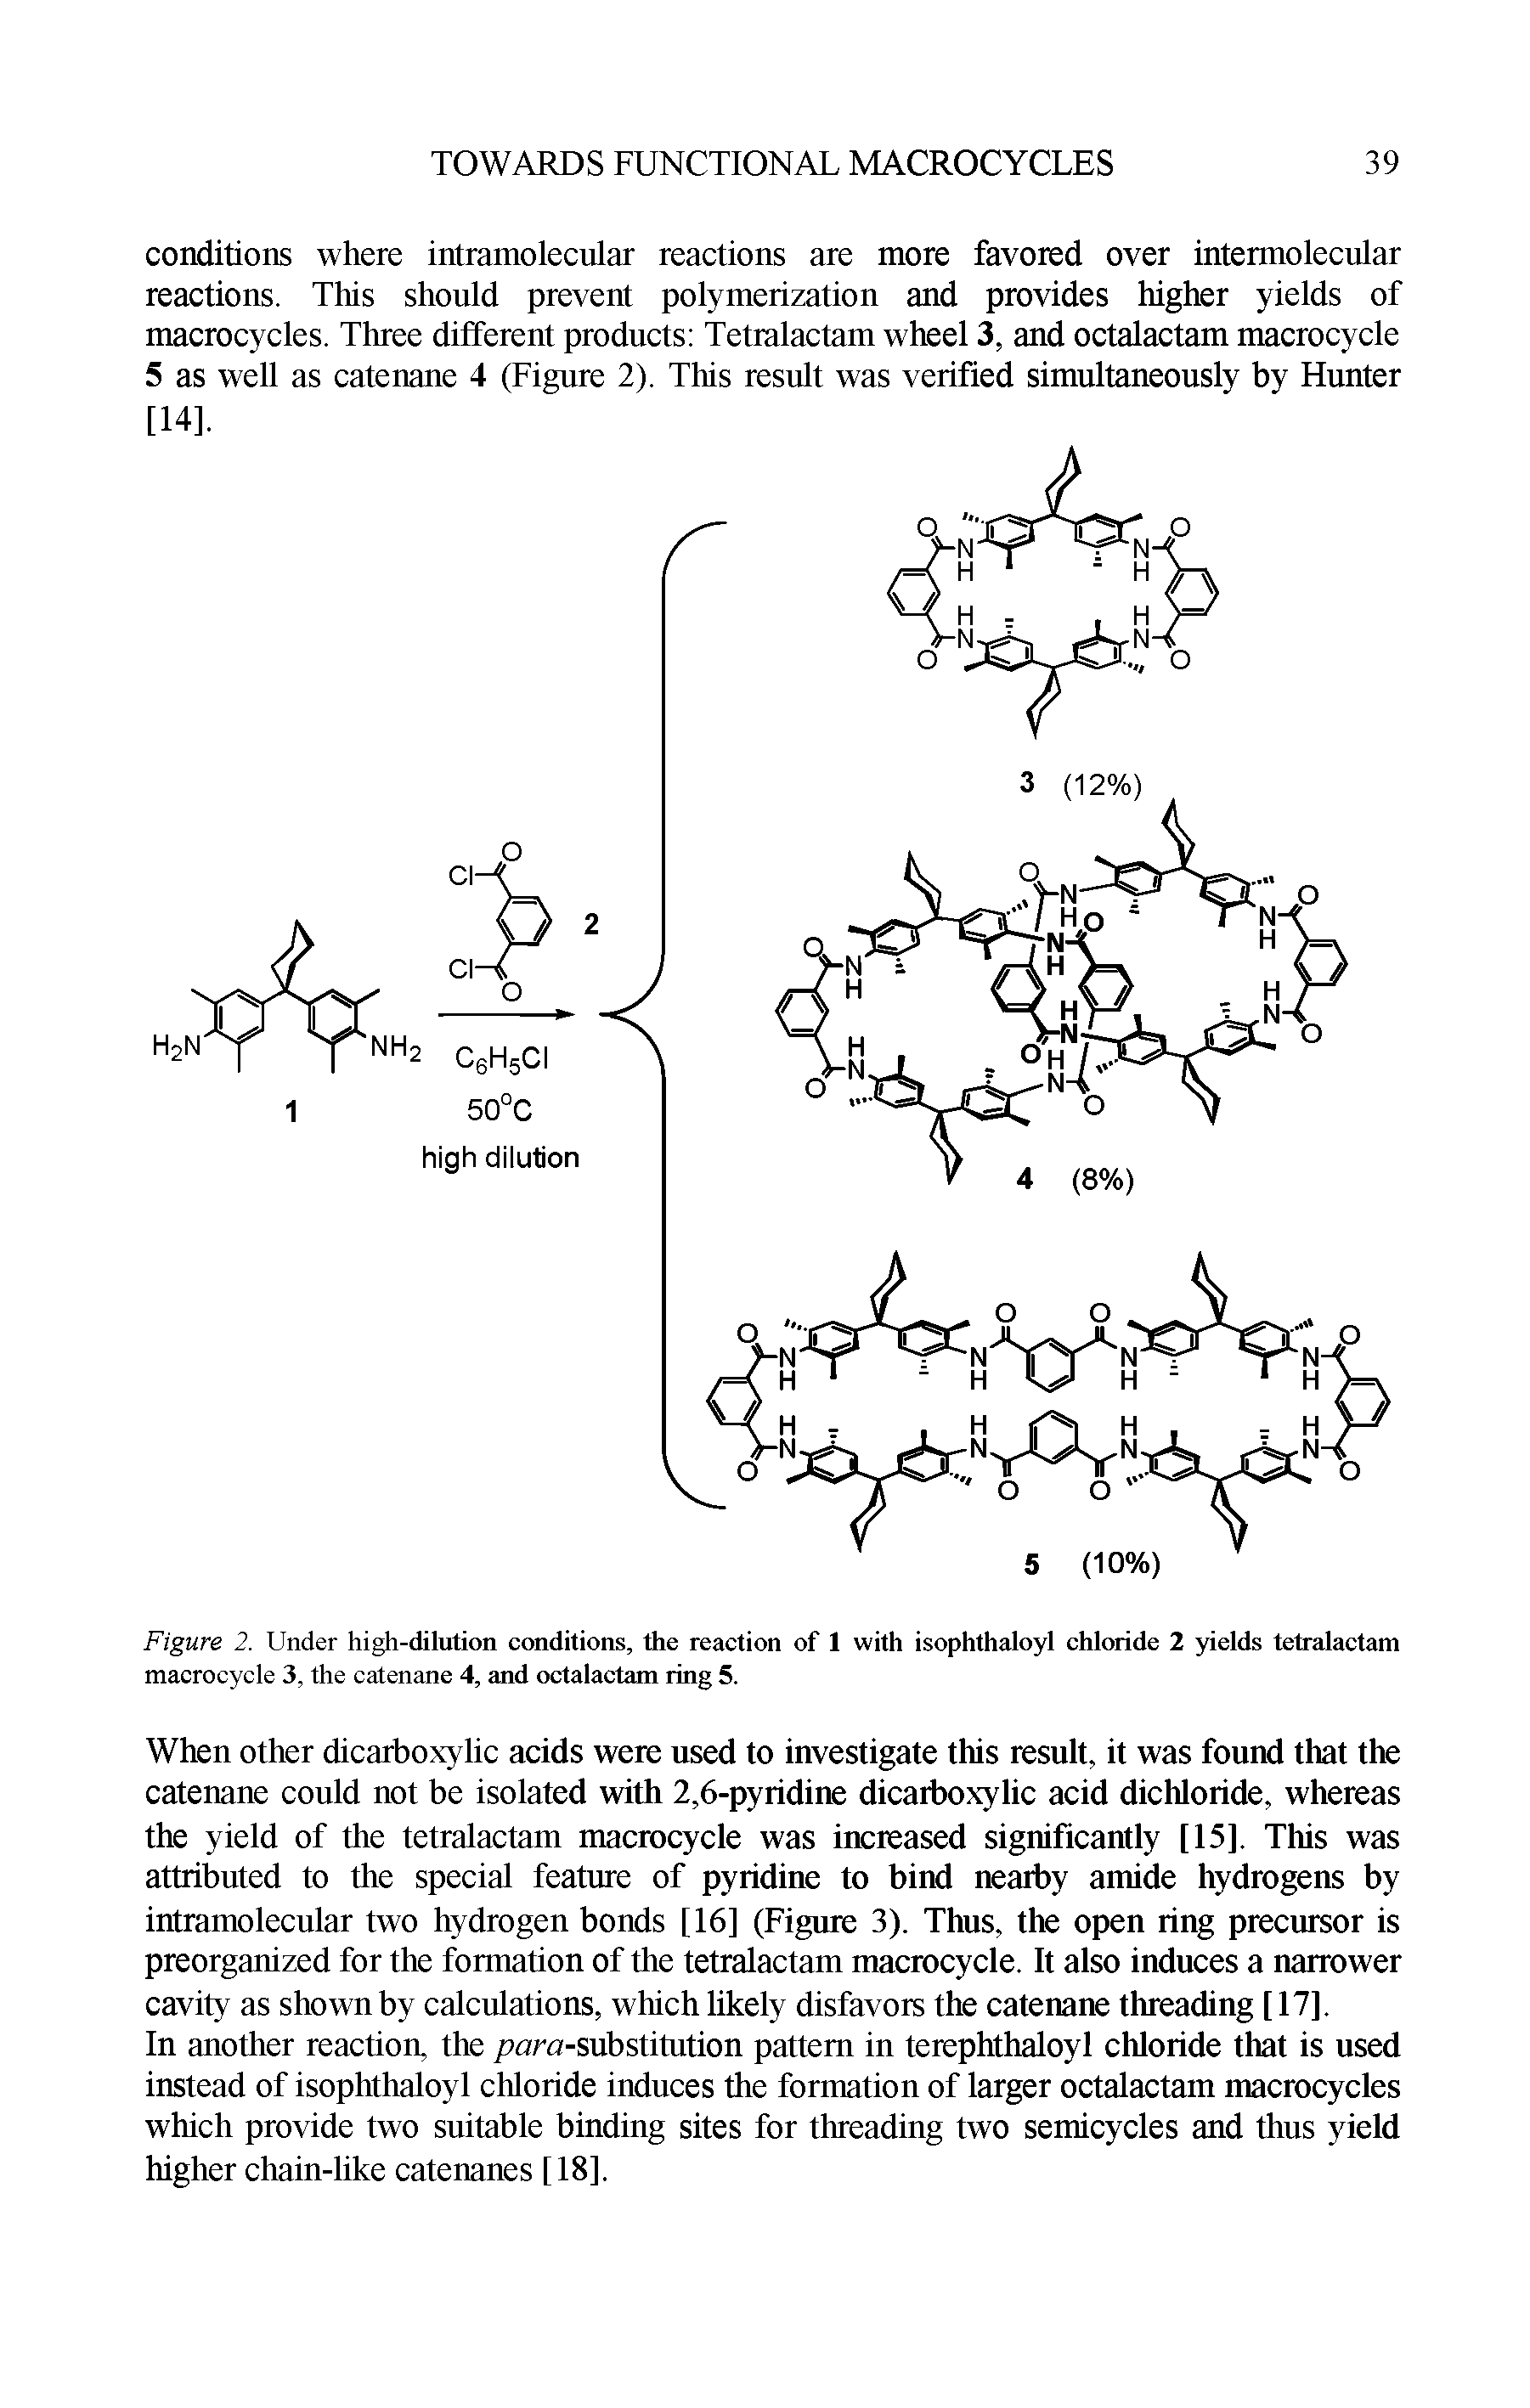 Figure 2. Under high-dilution conditions, die reaction of 1 with isophthaloyl chloride 2 yields tetralactam macrocycle 3, the catenane 4, and octalactam ring 5.